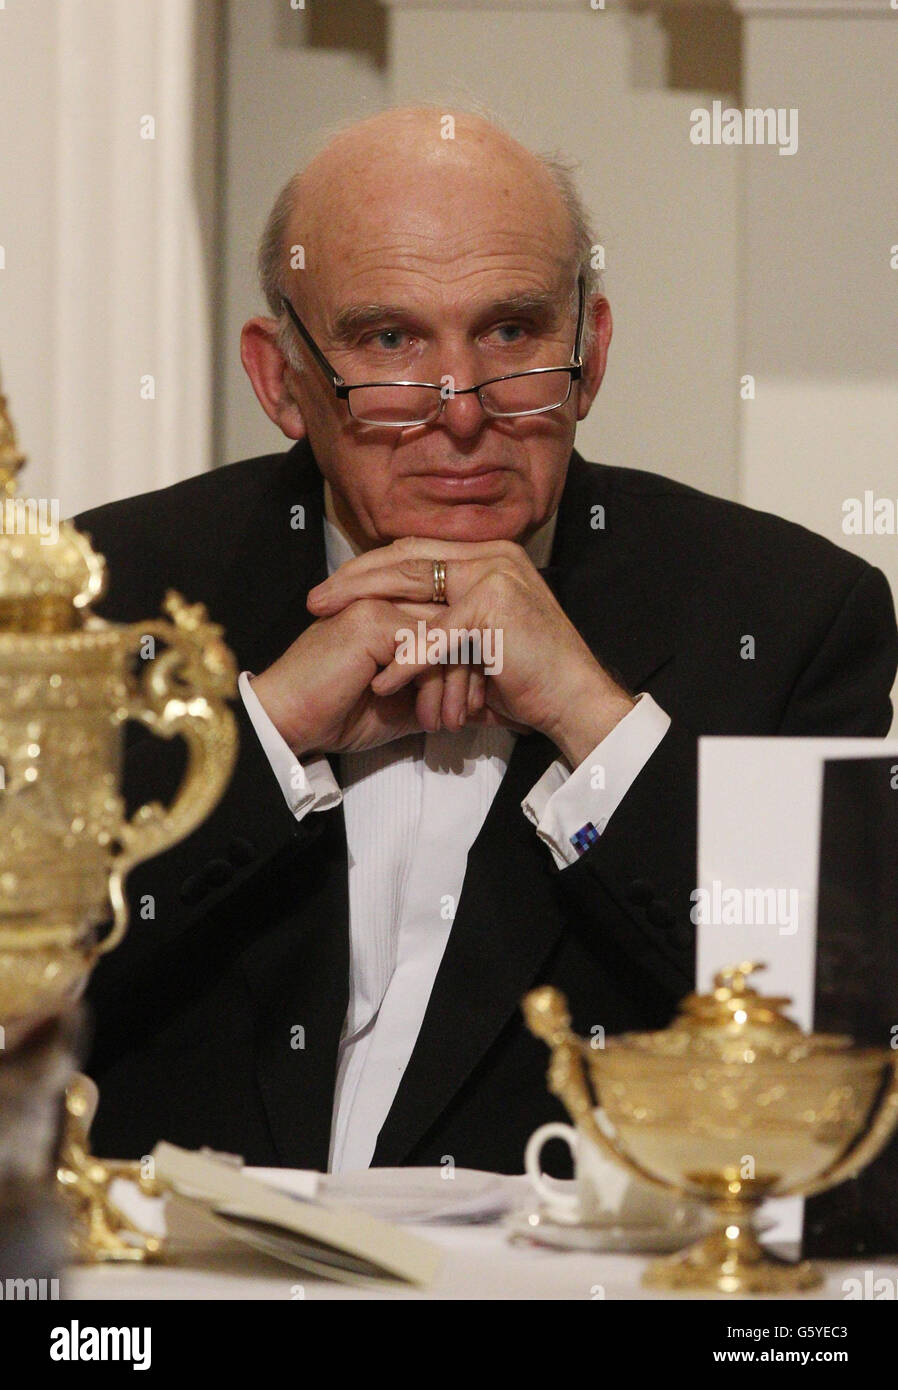 Business Secretary Vince Cable beim jährlichen Trade and Industry Dinner im Mansion House in London. Stockfoto